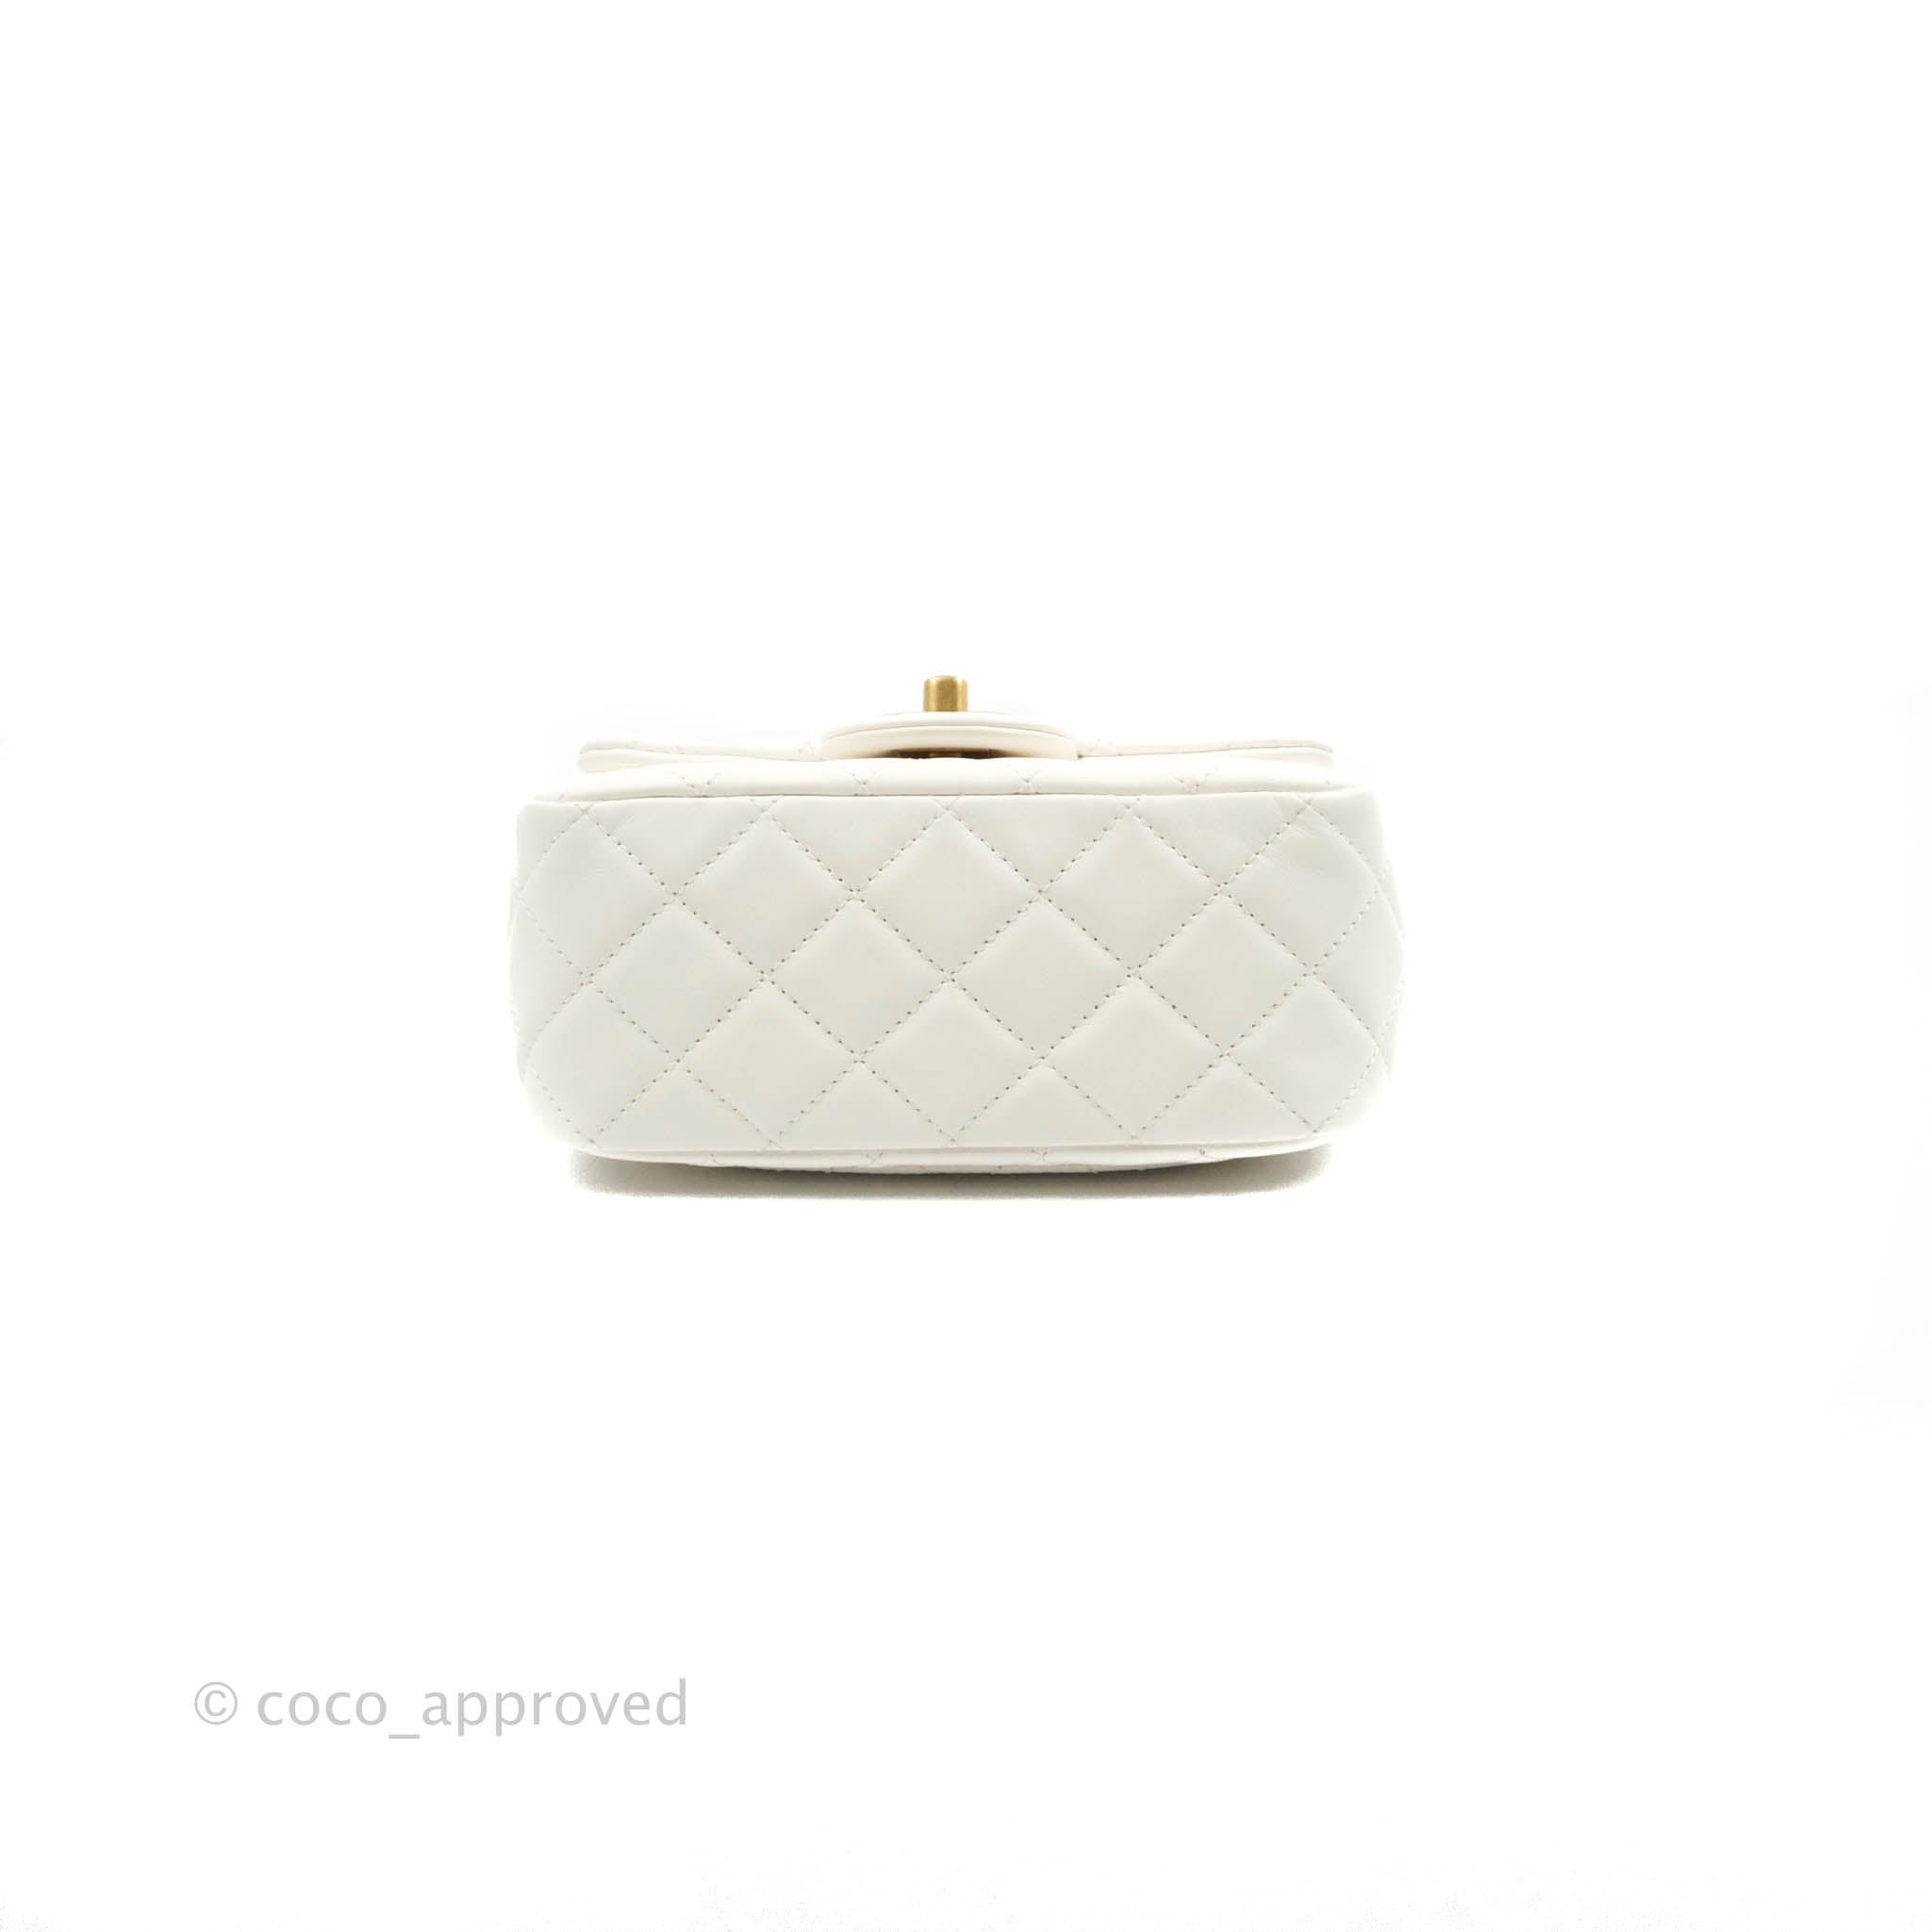 MINI BAGS  Dearluxe - Authentic Luxury Bags & Accessories